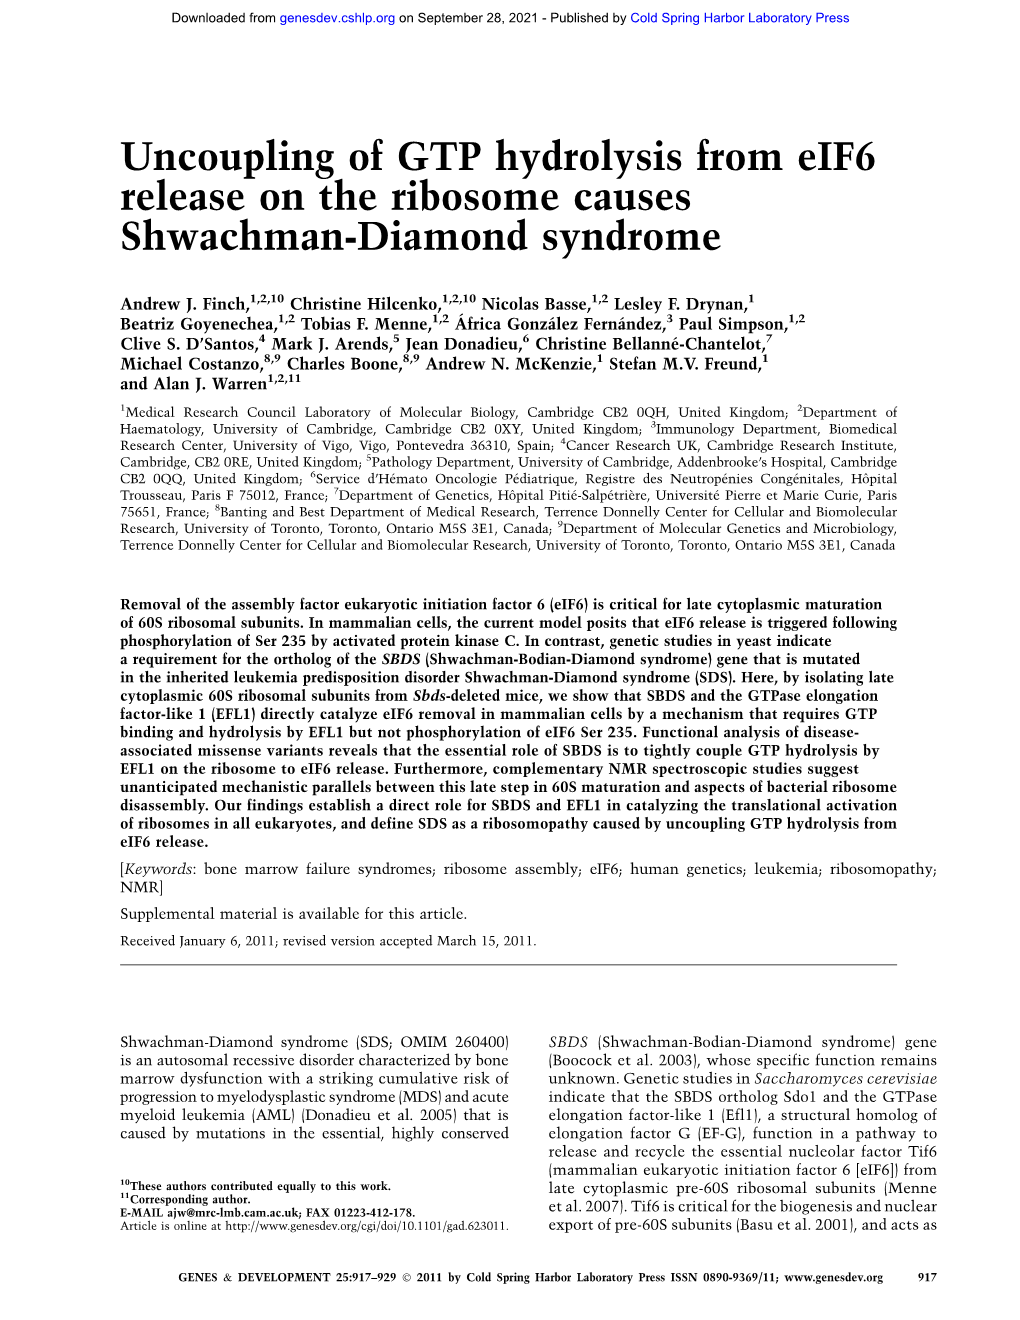 Uncoupling of GTP Hydrolysis from Eif6 Release on the Ribosome Causes Shwachman-Diamond Syndrome